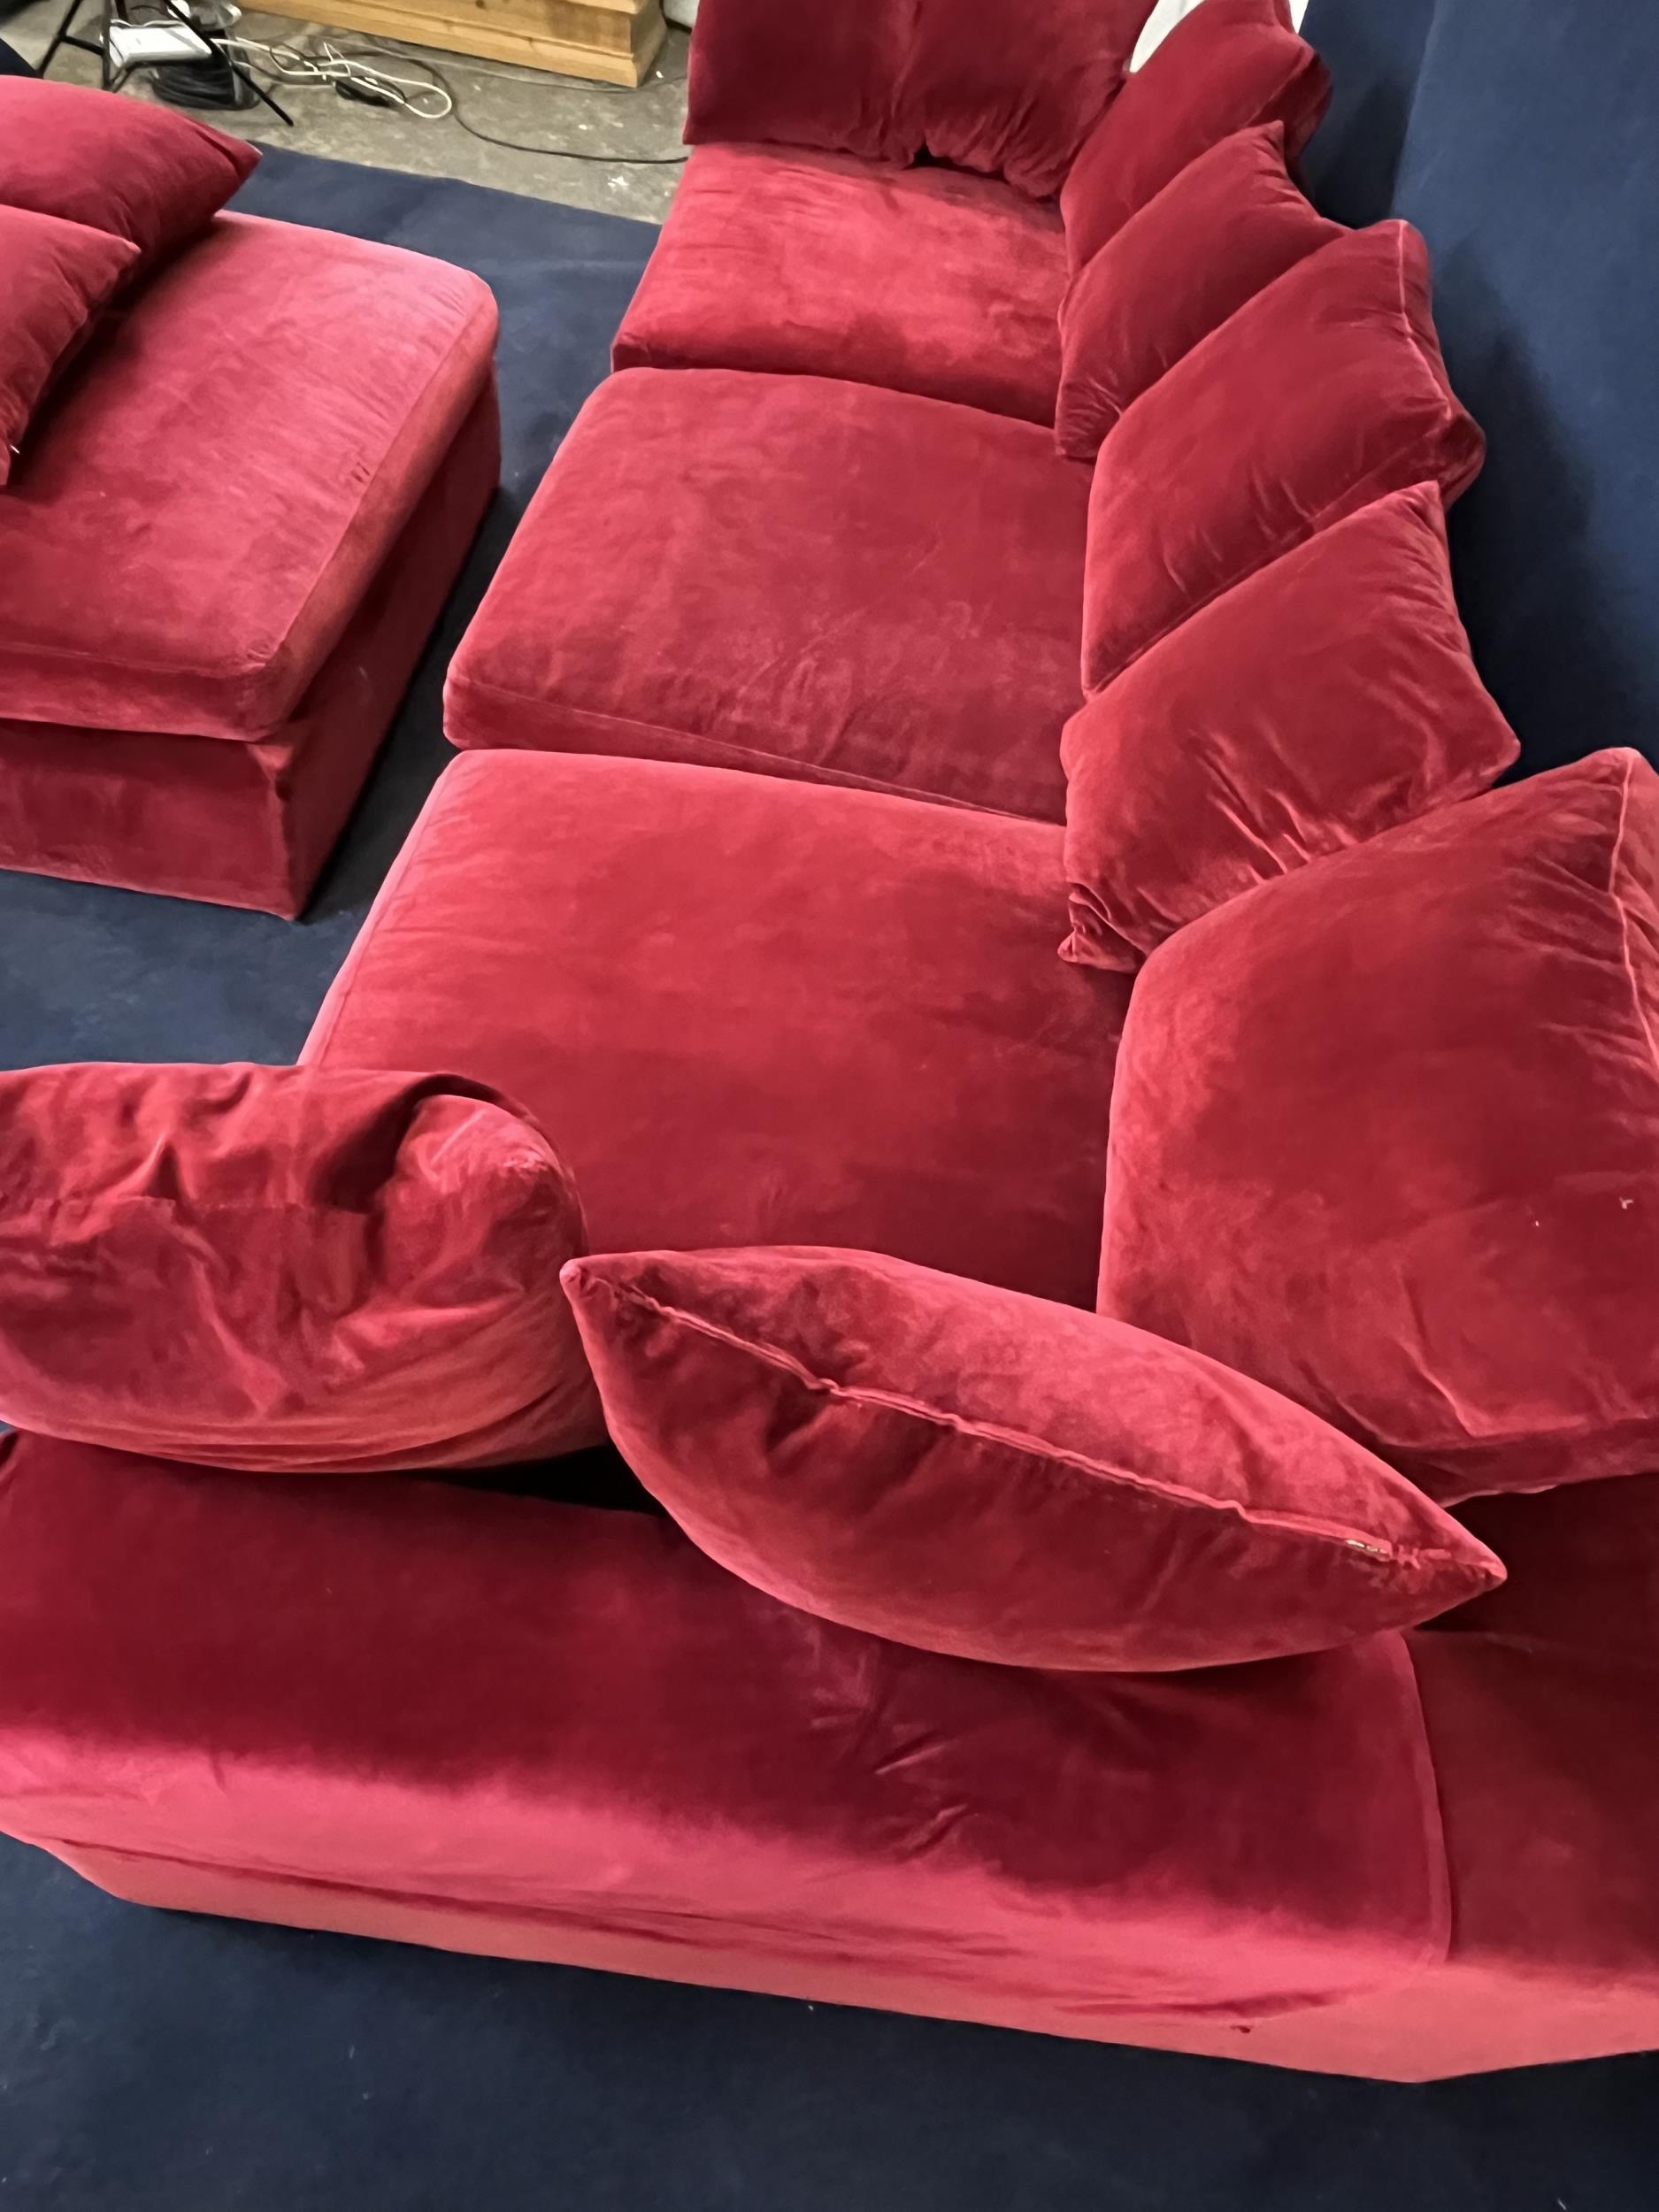 A large modern sofa in red upholstery, with a matching stool. H.60 W.330 in three parts D.120.cm - Image 5 of 5